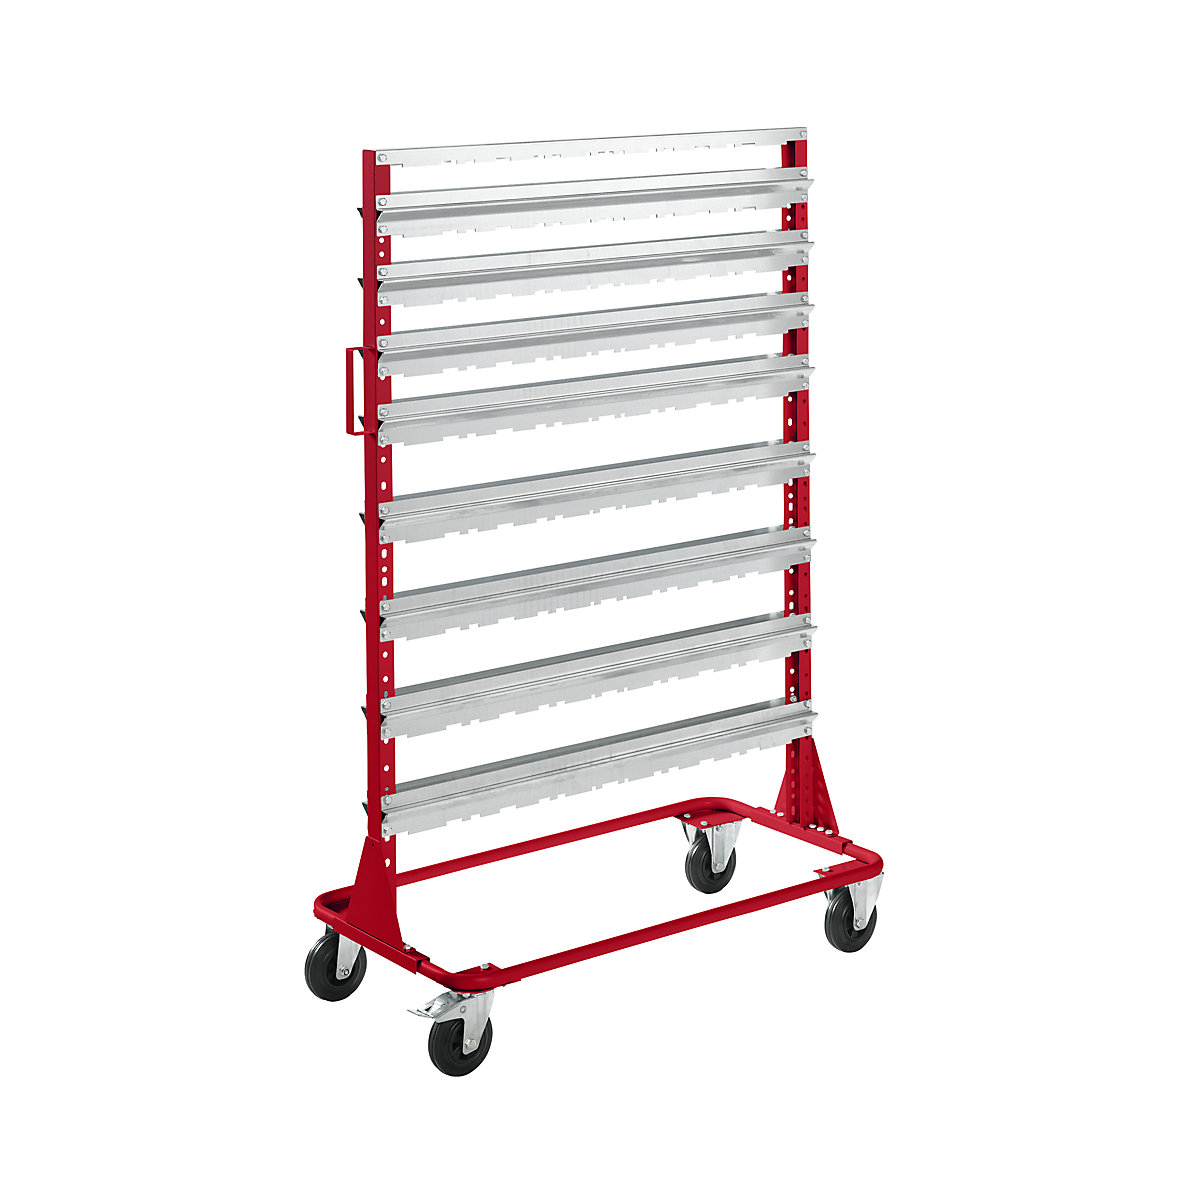 Mobile rack, height 1588 mm, mobile rack for 112 open fronted storage bins, flame red-3